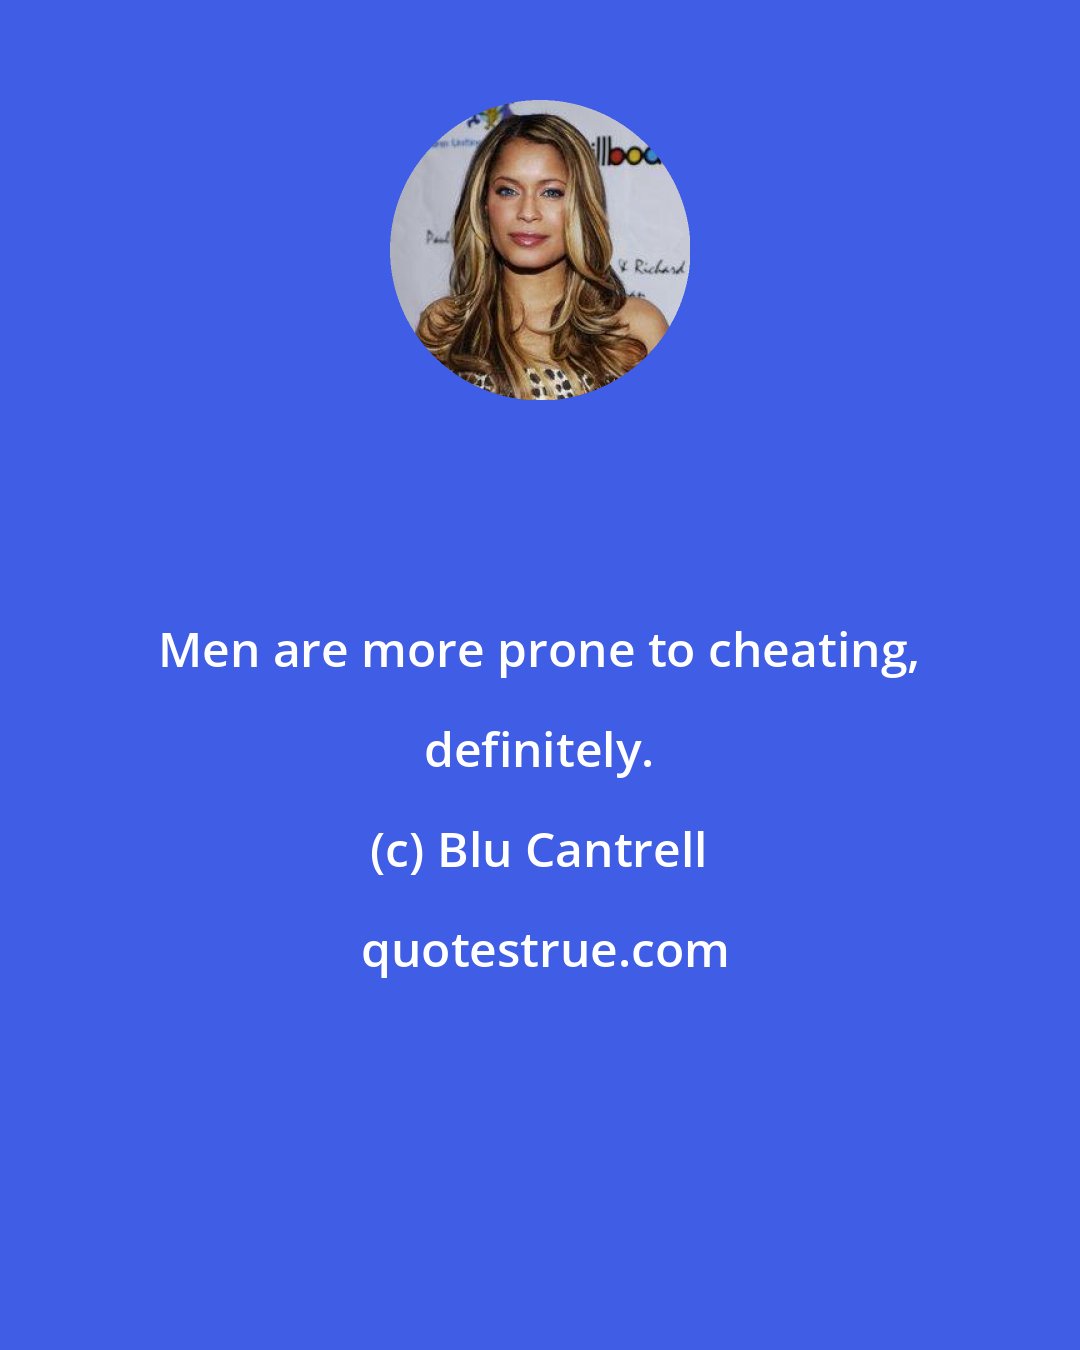 Blu Cantrell: Men are more prone to cheating, definitely.